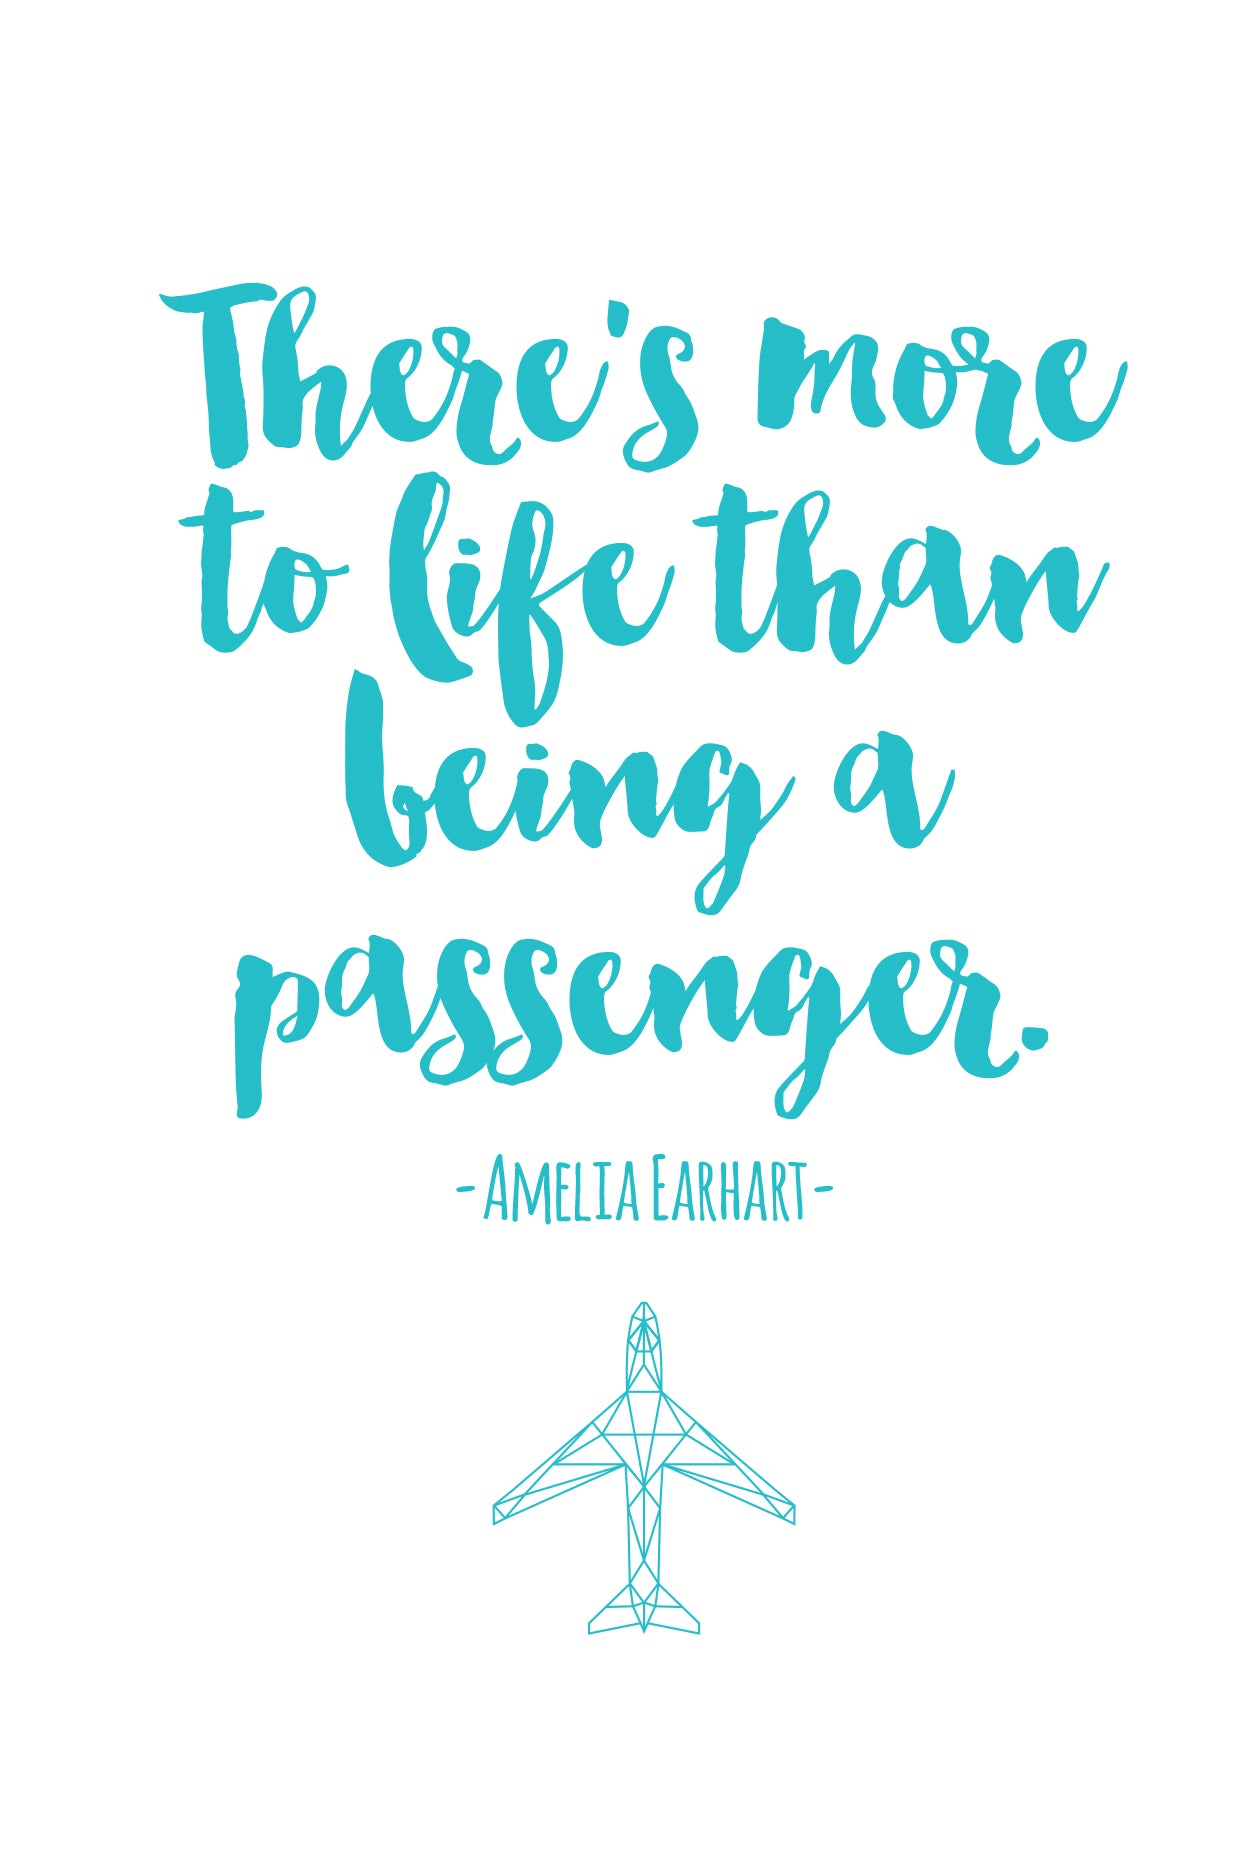 Amelia Earhart teal text quote with a geometric aircraft design.